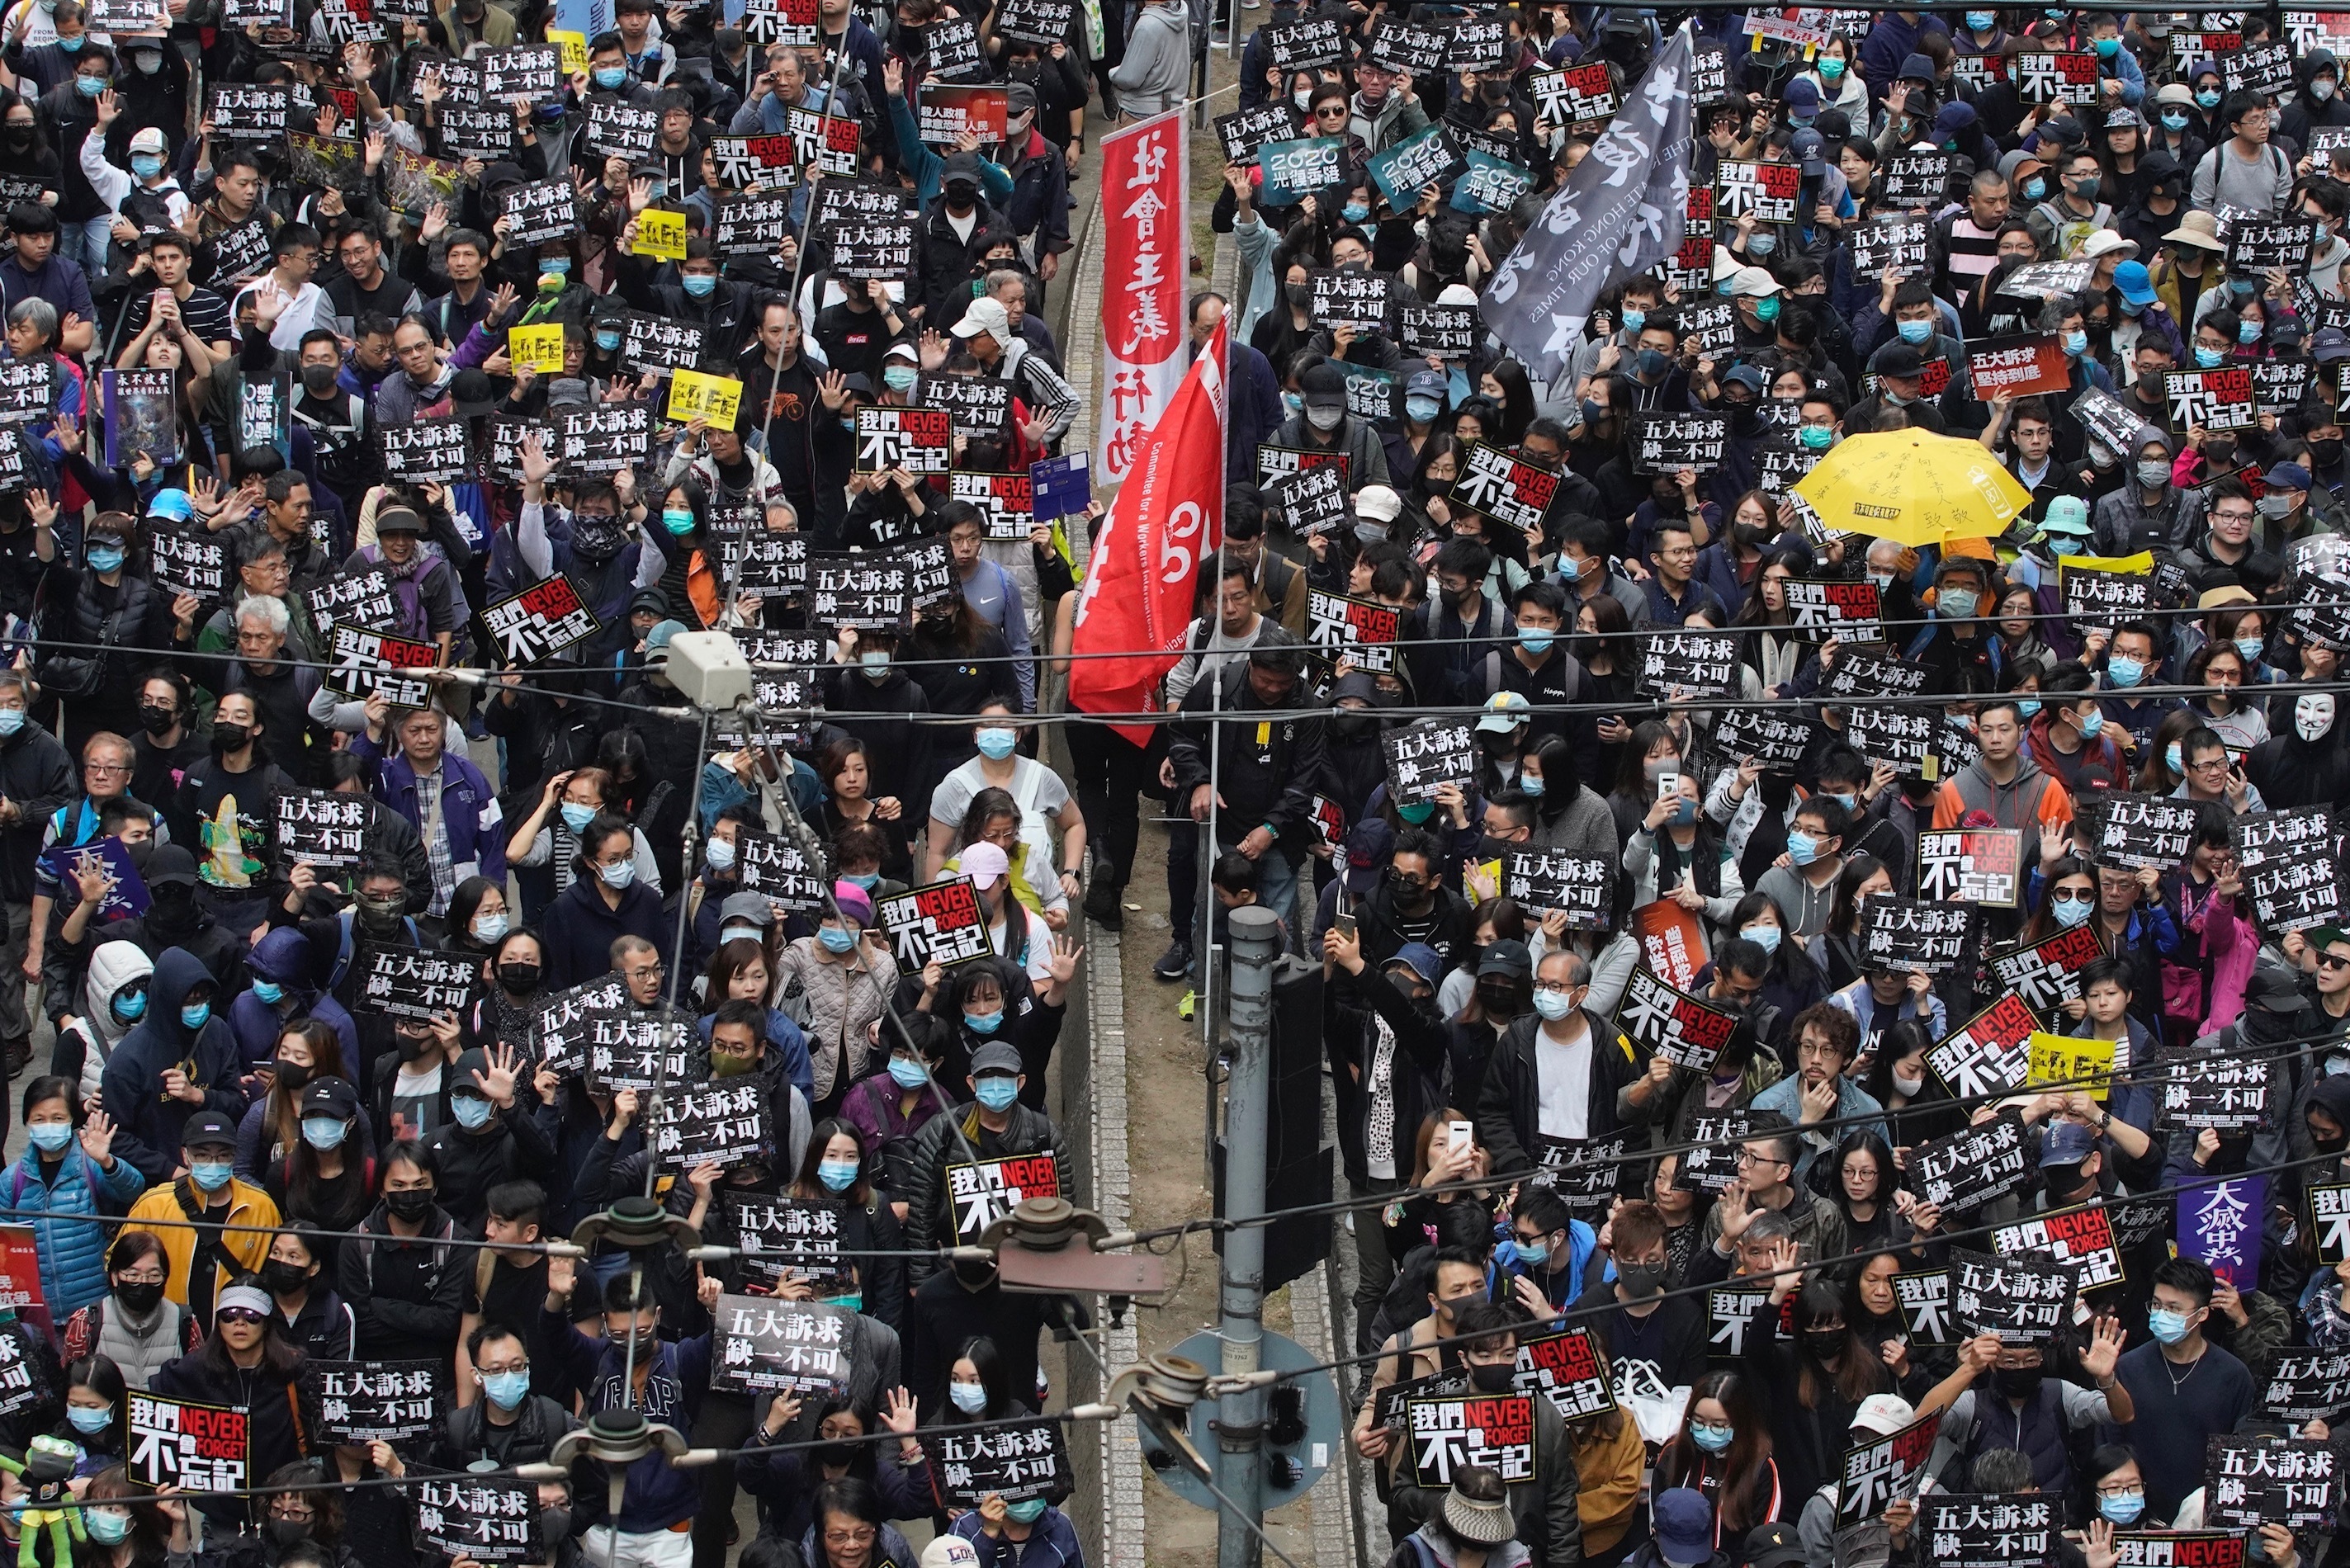 Hong Kong people participate in their annual pro-democracy march to insist their five demands be matched by the government in Hong Kong, on Wednesday.